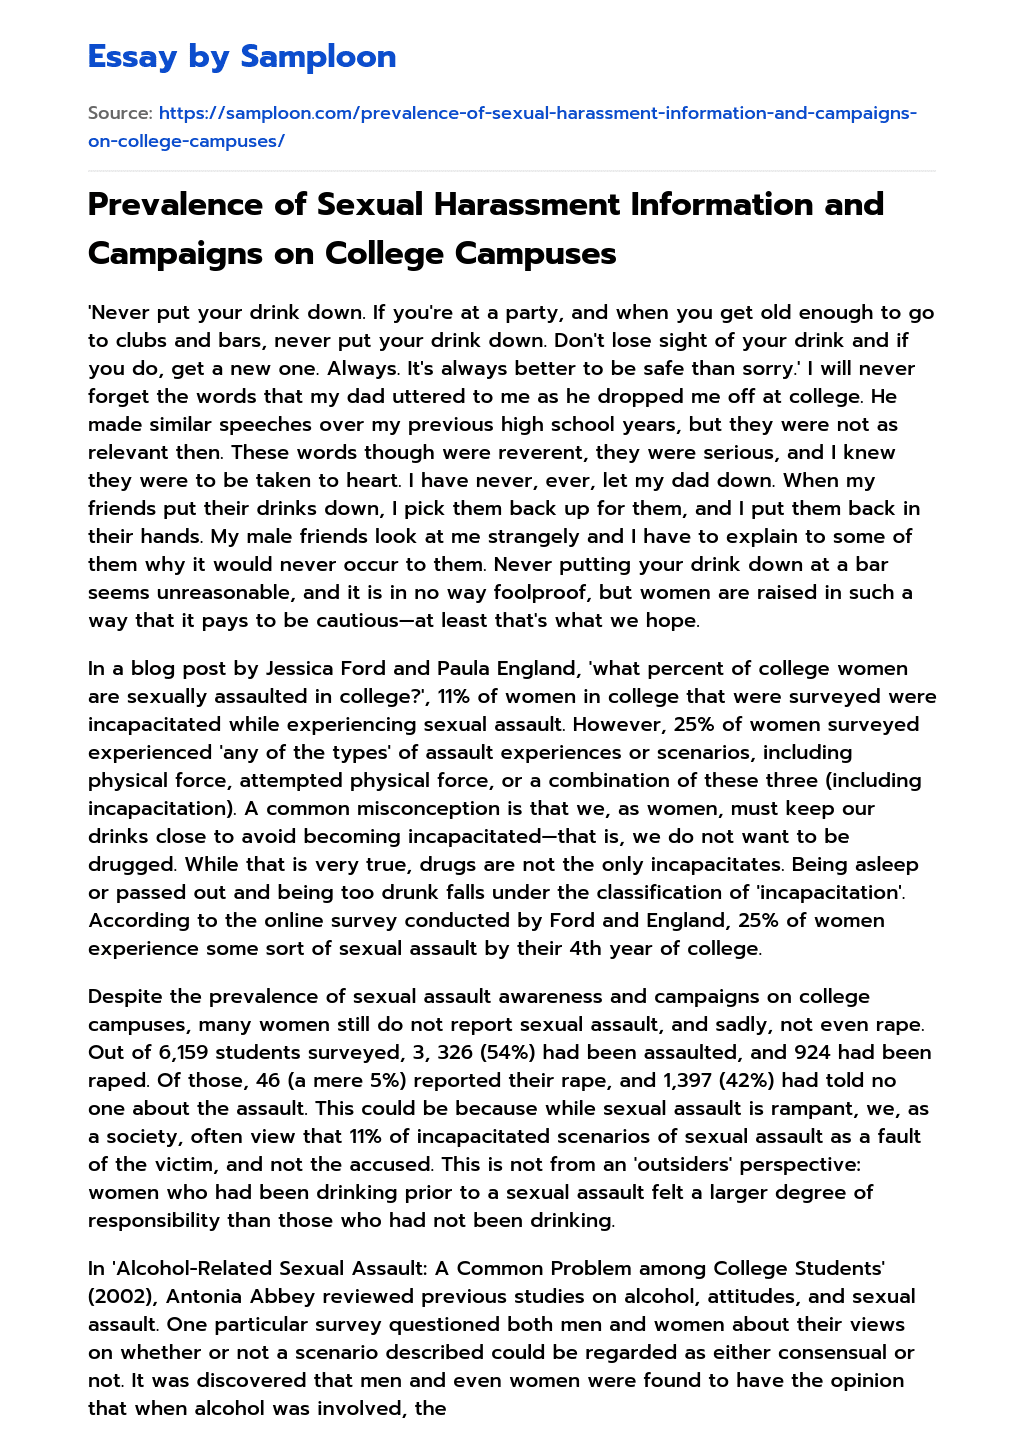 Prevalence of Sexual Harassment Information and Campaigns on College Campuses essay